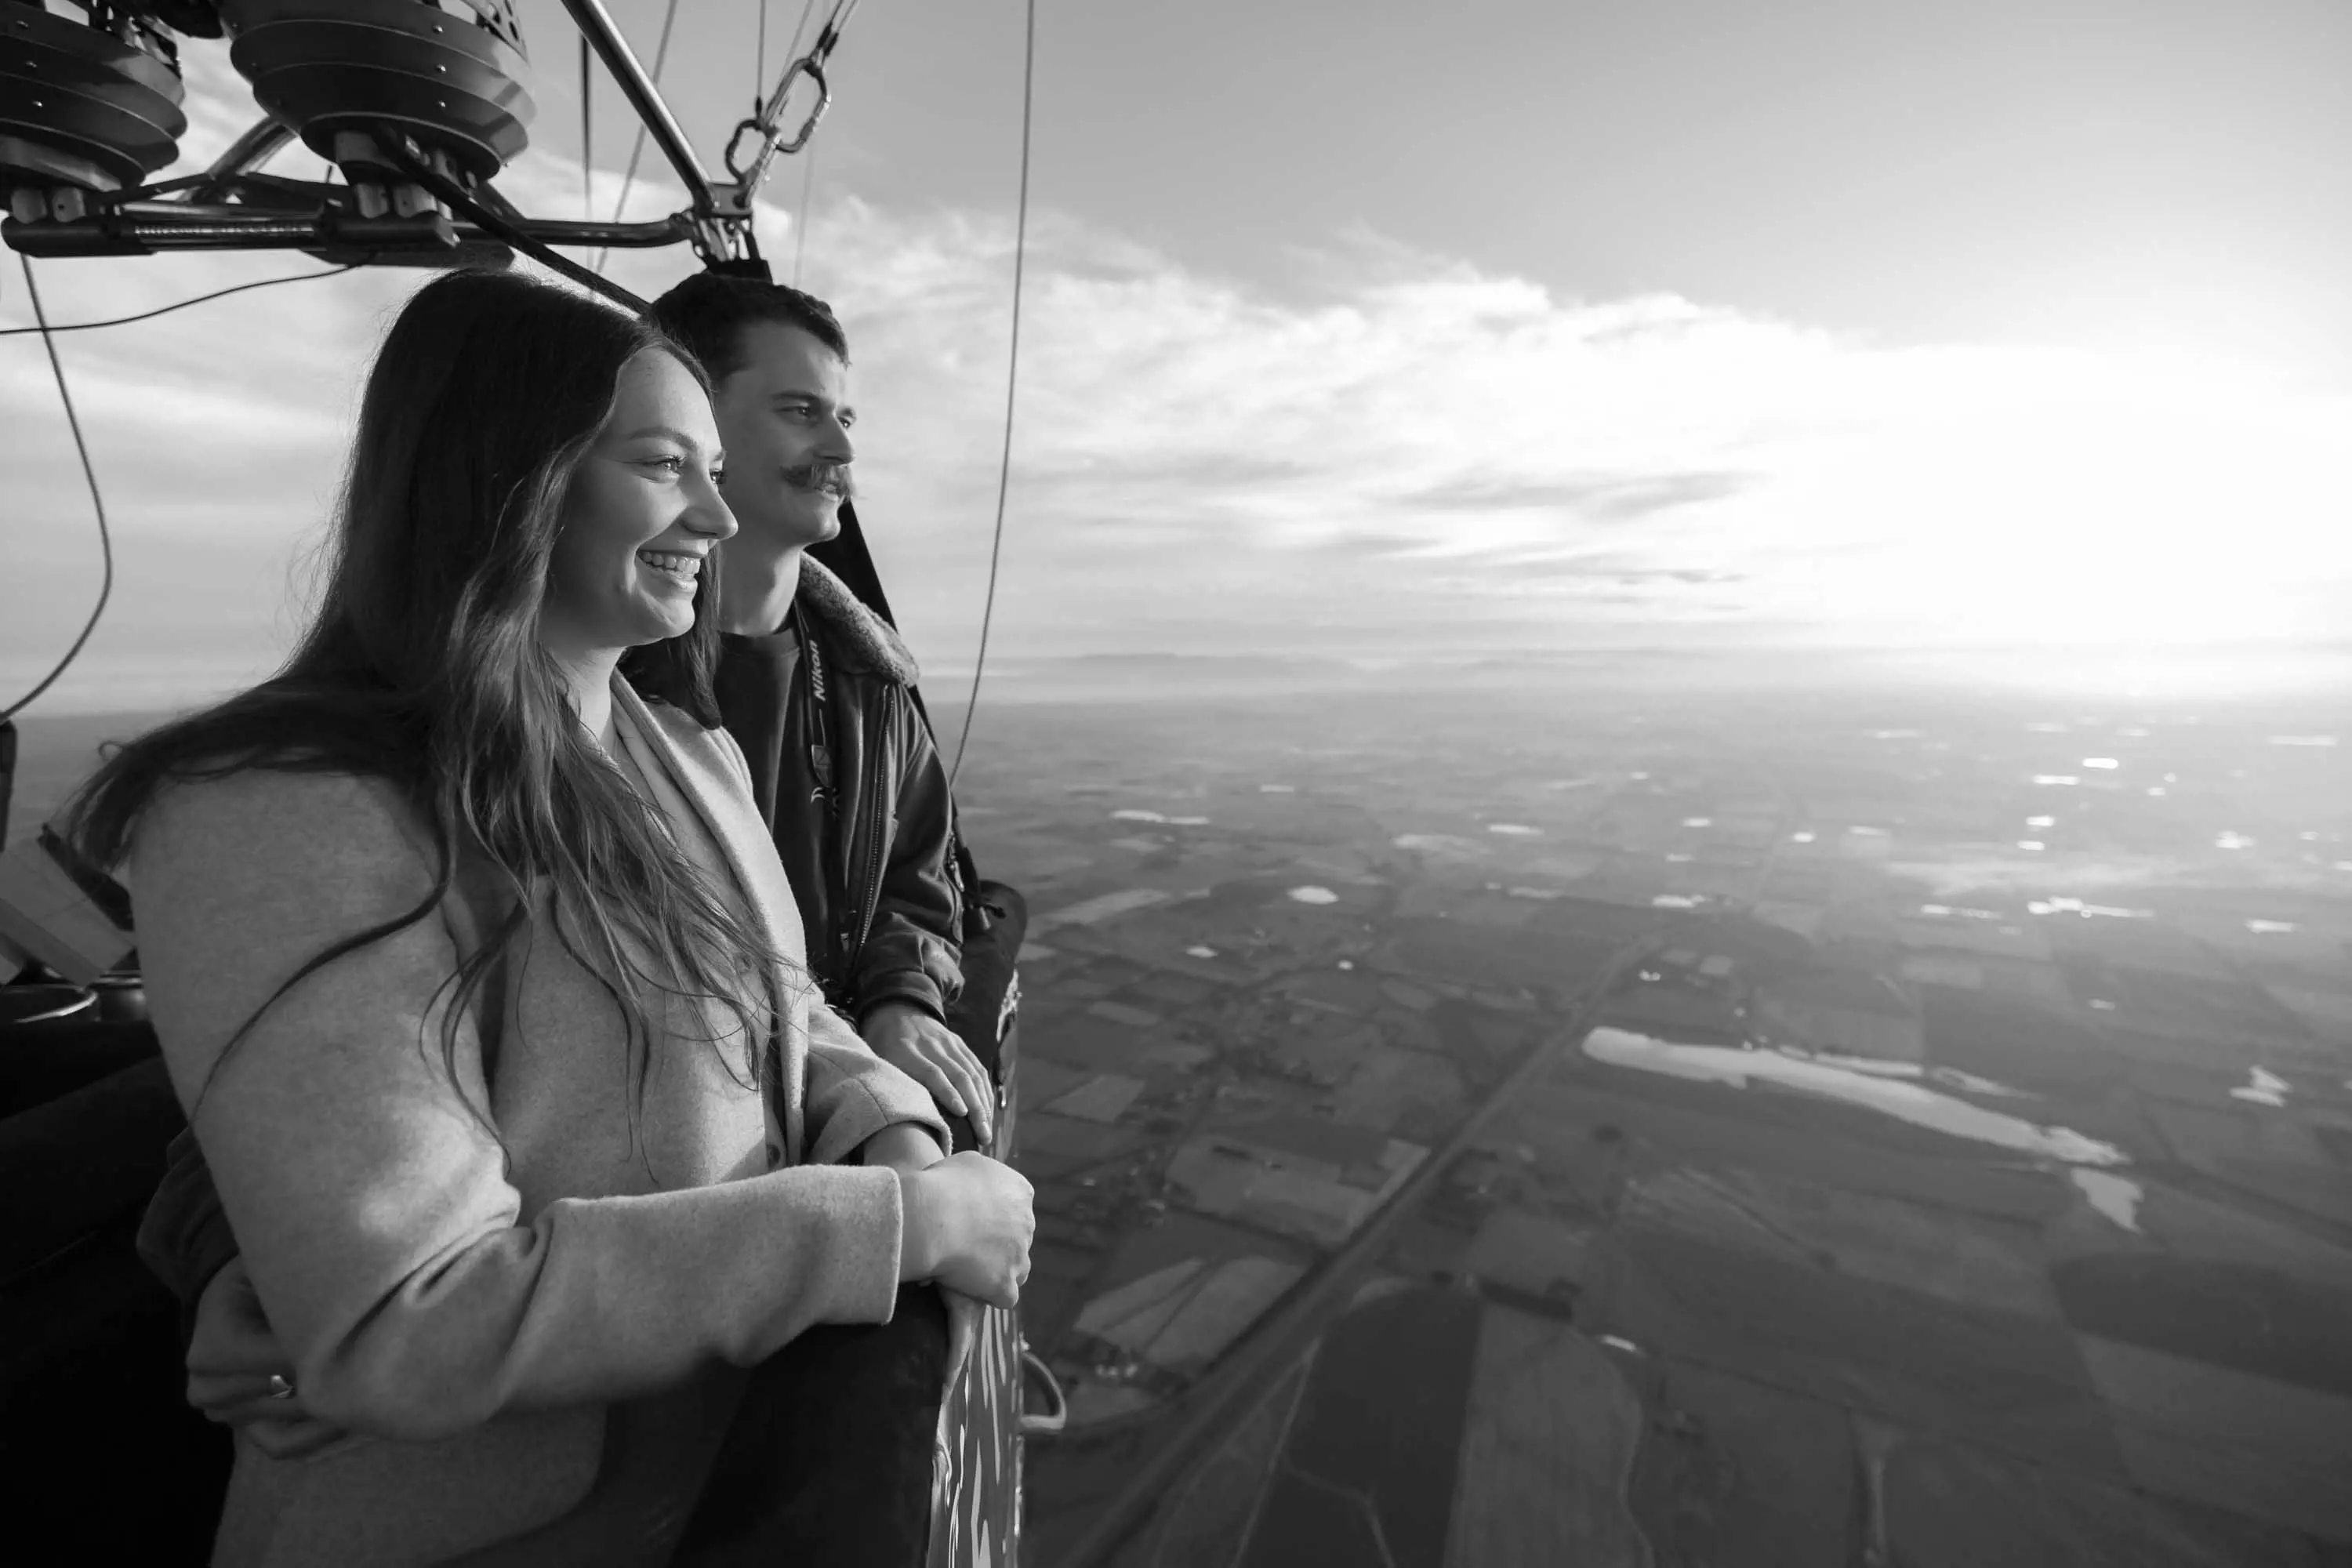 A young couple enjoy the view of farm lands by sunrise from the basket of a large, hot air balloon.